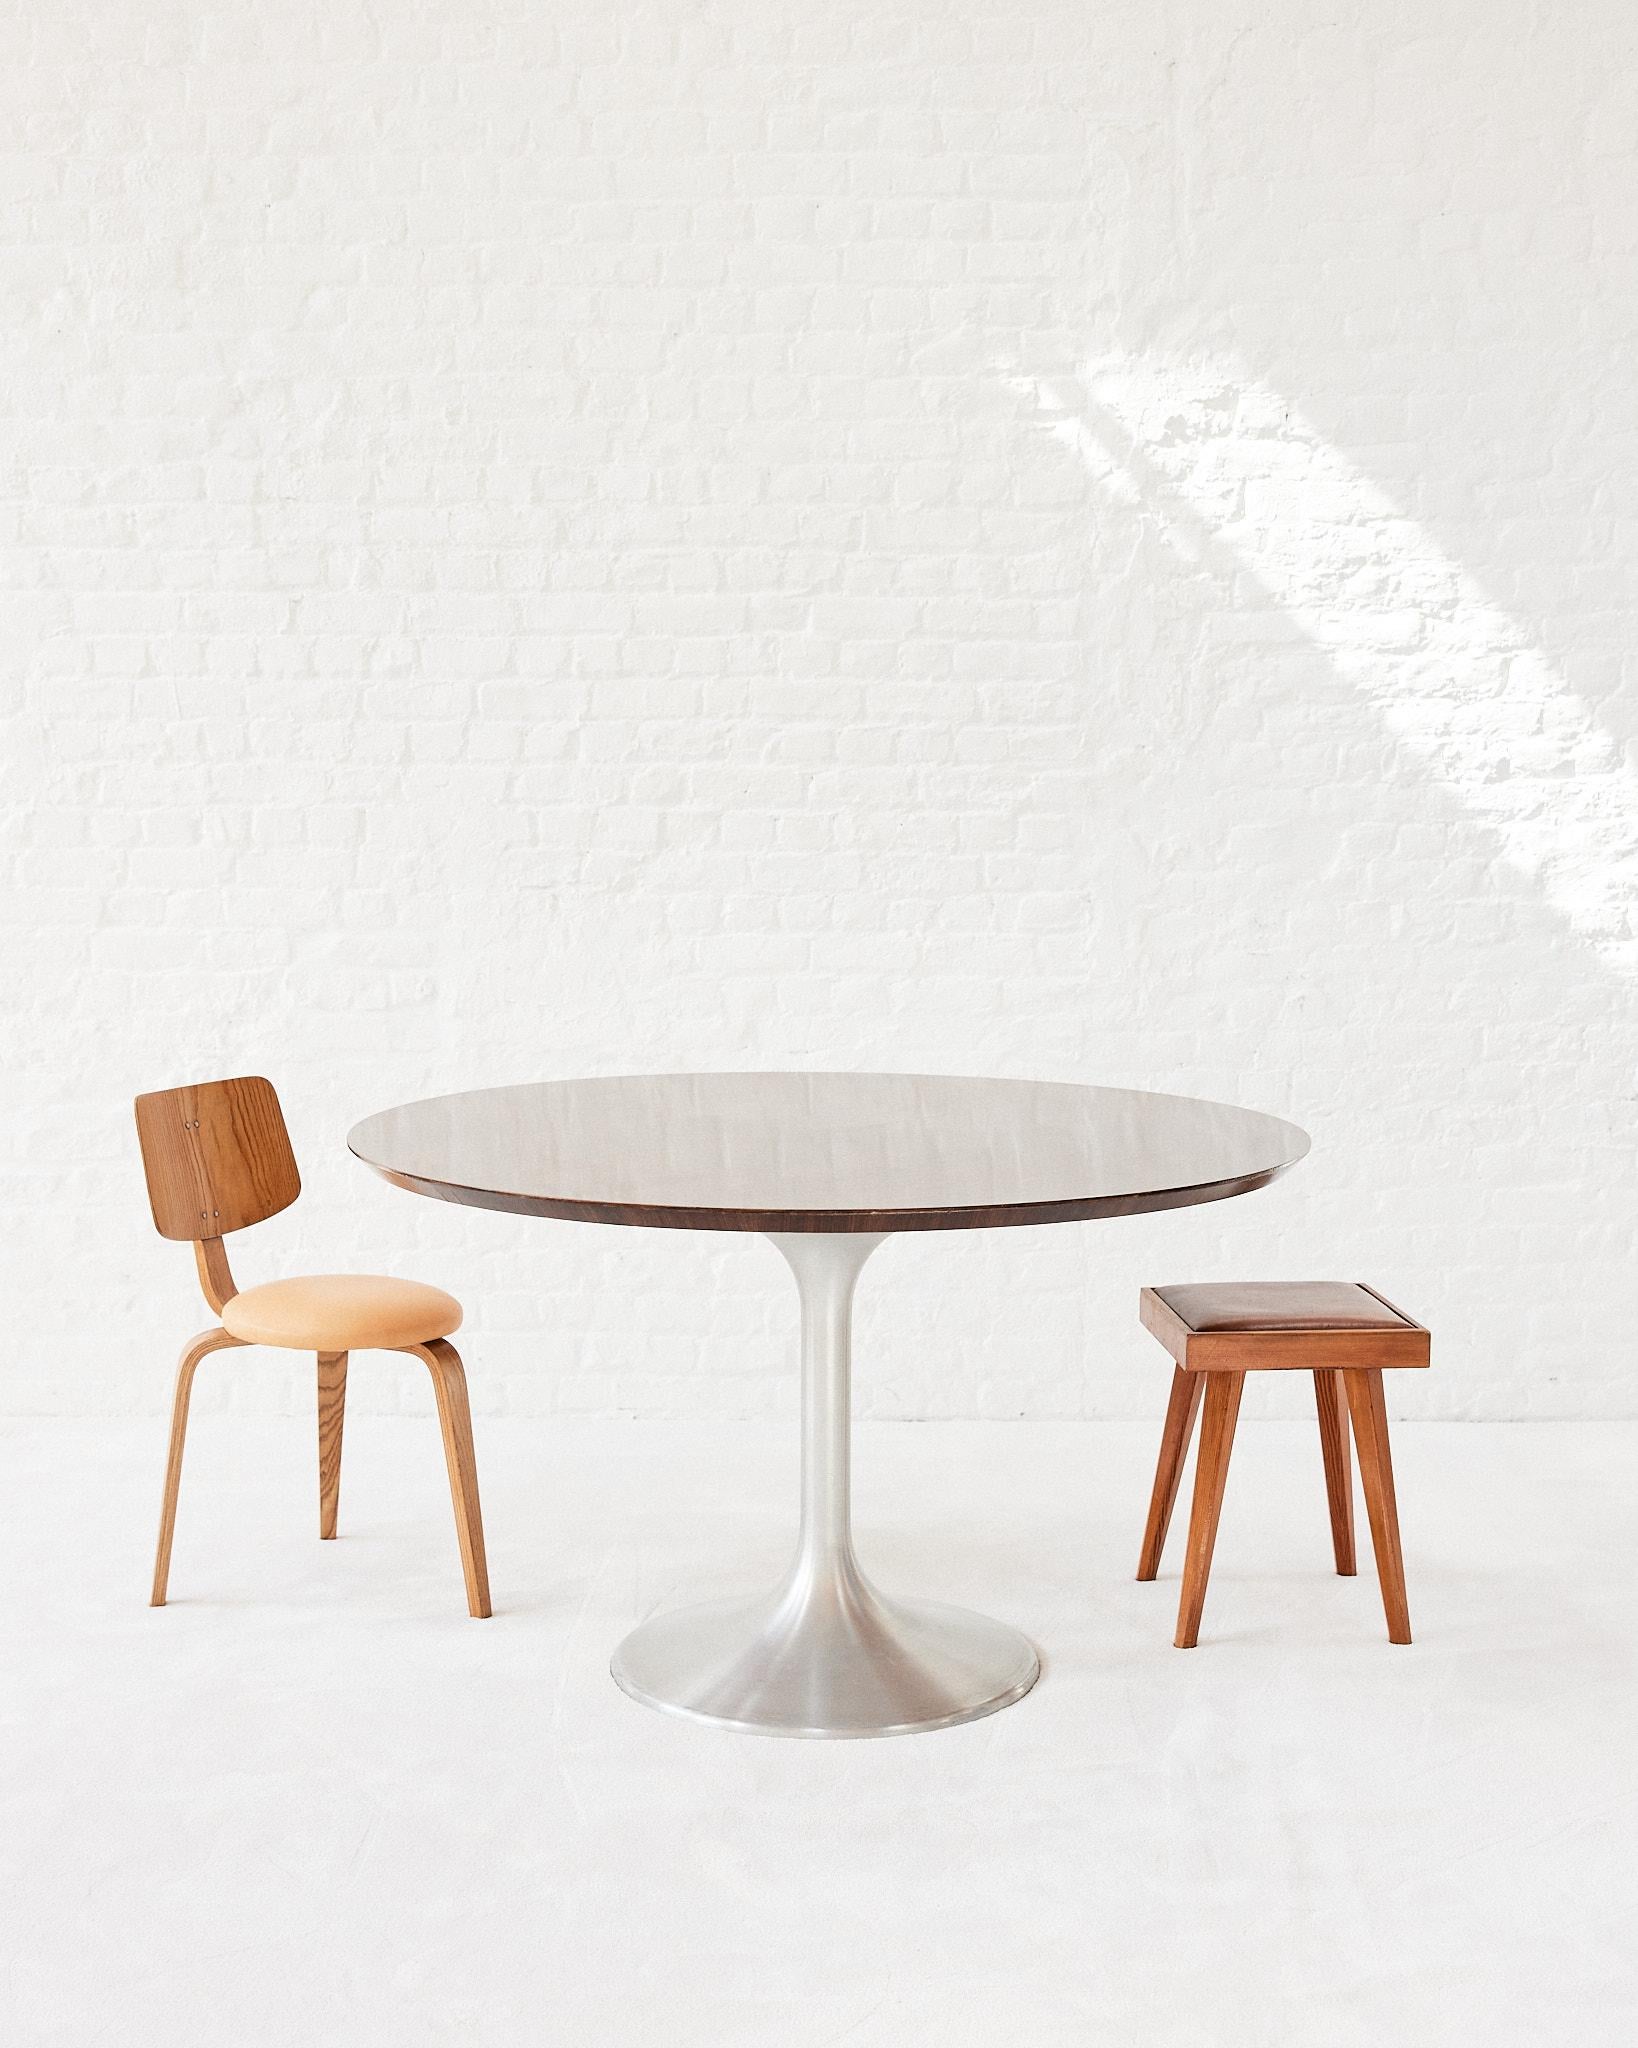 Agarico table with a walnut veneer top and aluminium base. Designed in Italy in 1960. Its simplistic design brings to light the masterpiece of brilliant craftsmanship and can complement really well a dining area.